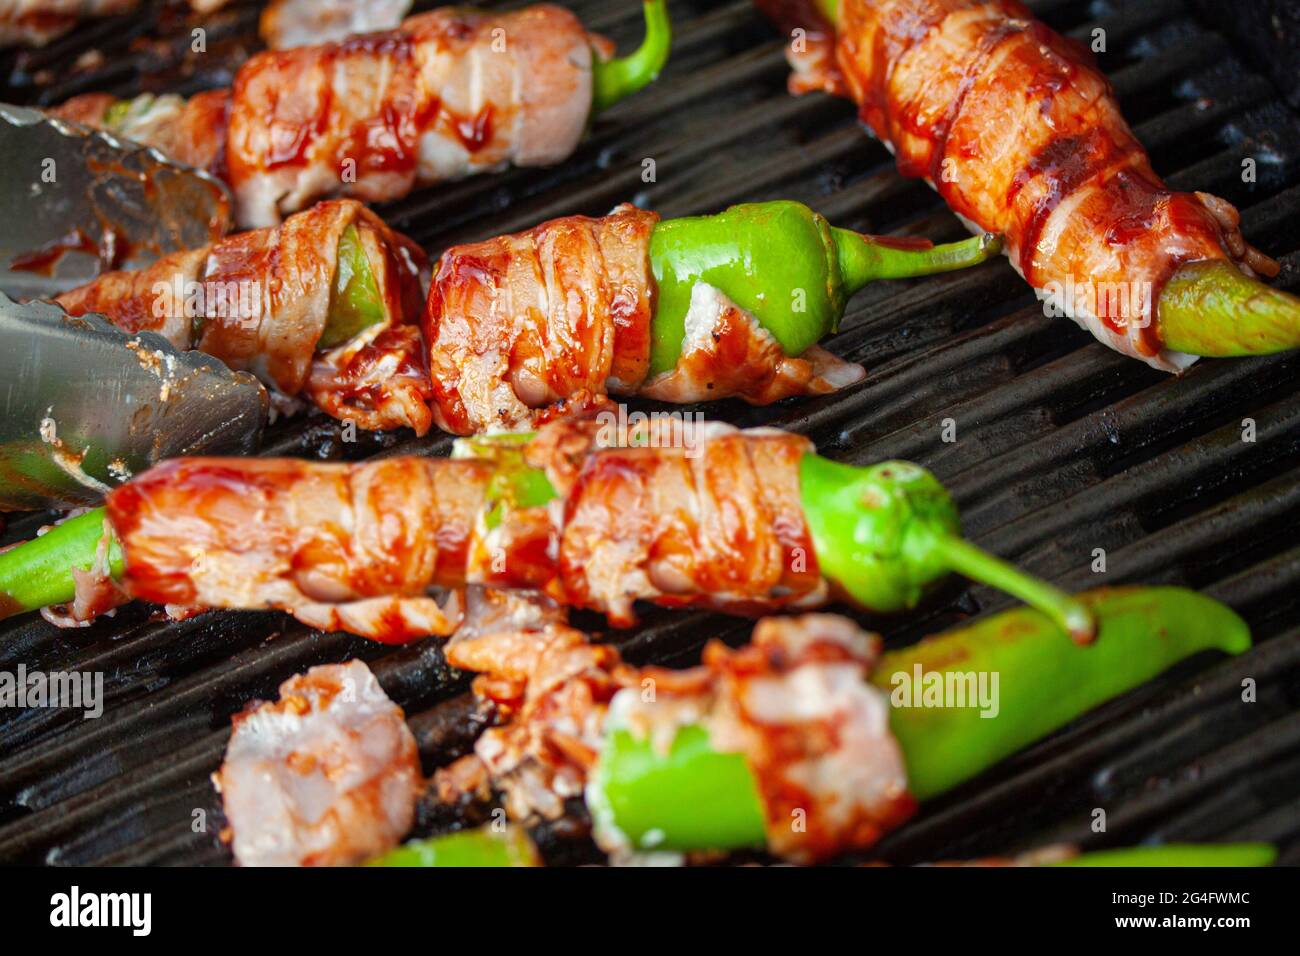 Jalapeno poppers on burning, grill. Spicy peppers stuffed with cream cheese and wrapped in bacon. Top view with selective focus. Stock Photo